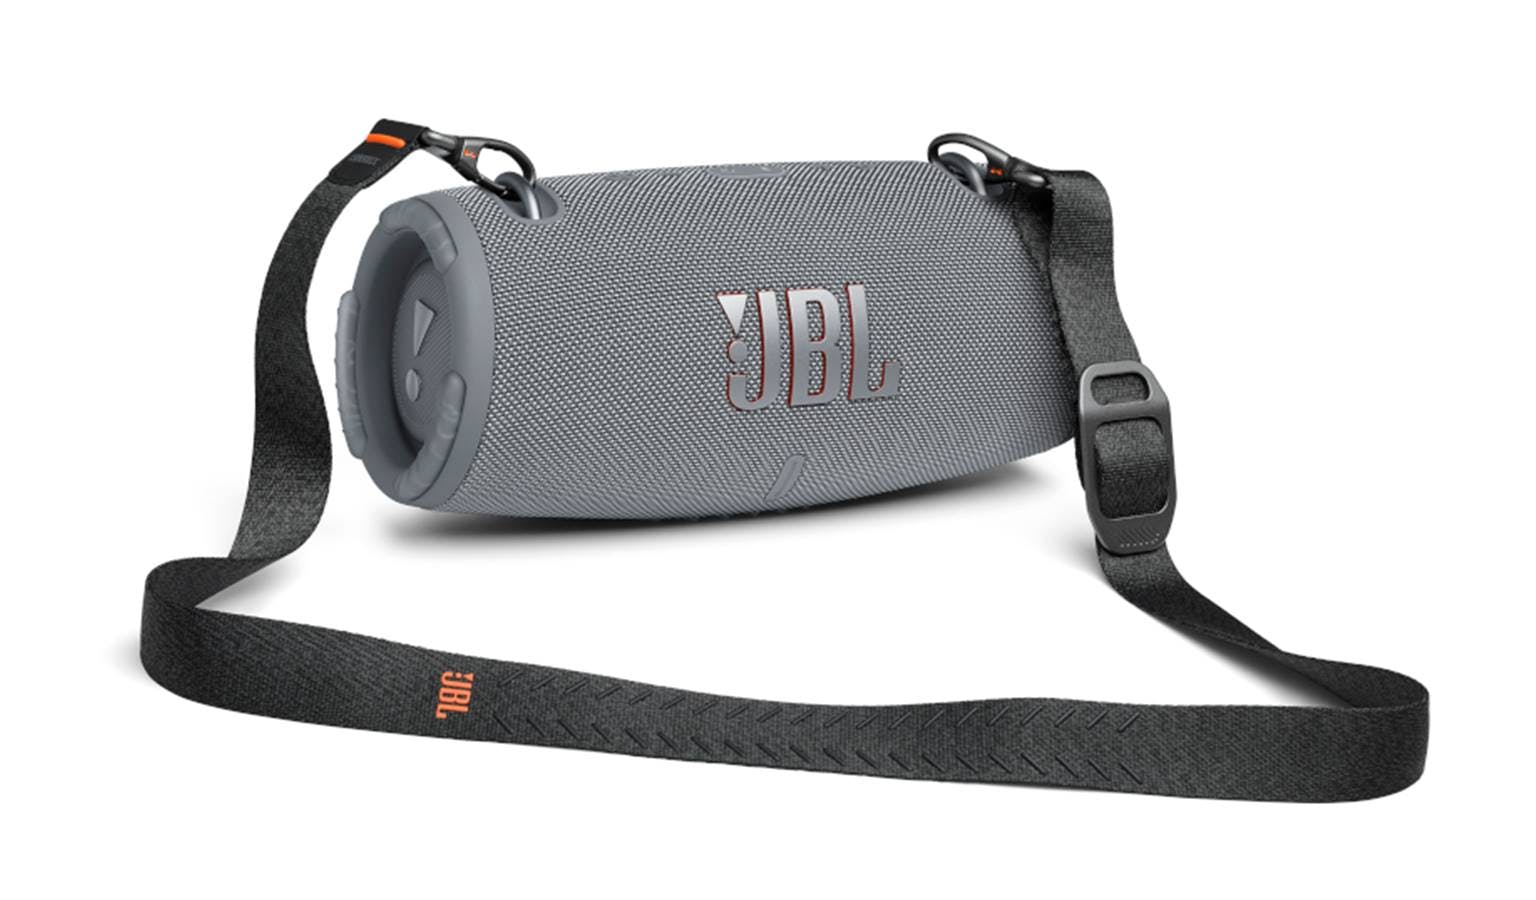 JBL Xtreme 3 Review - The Overall Best Speaker? 